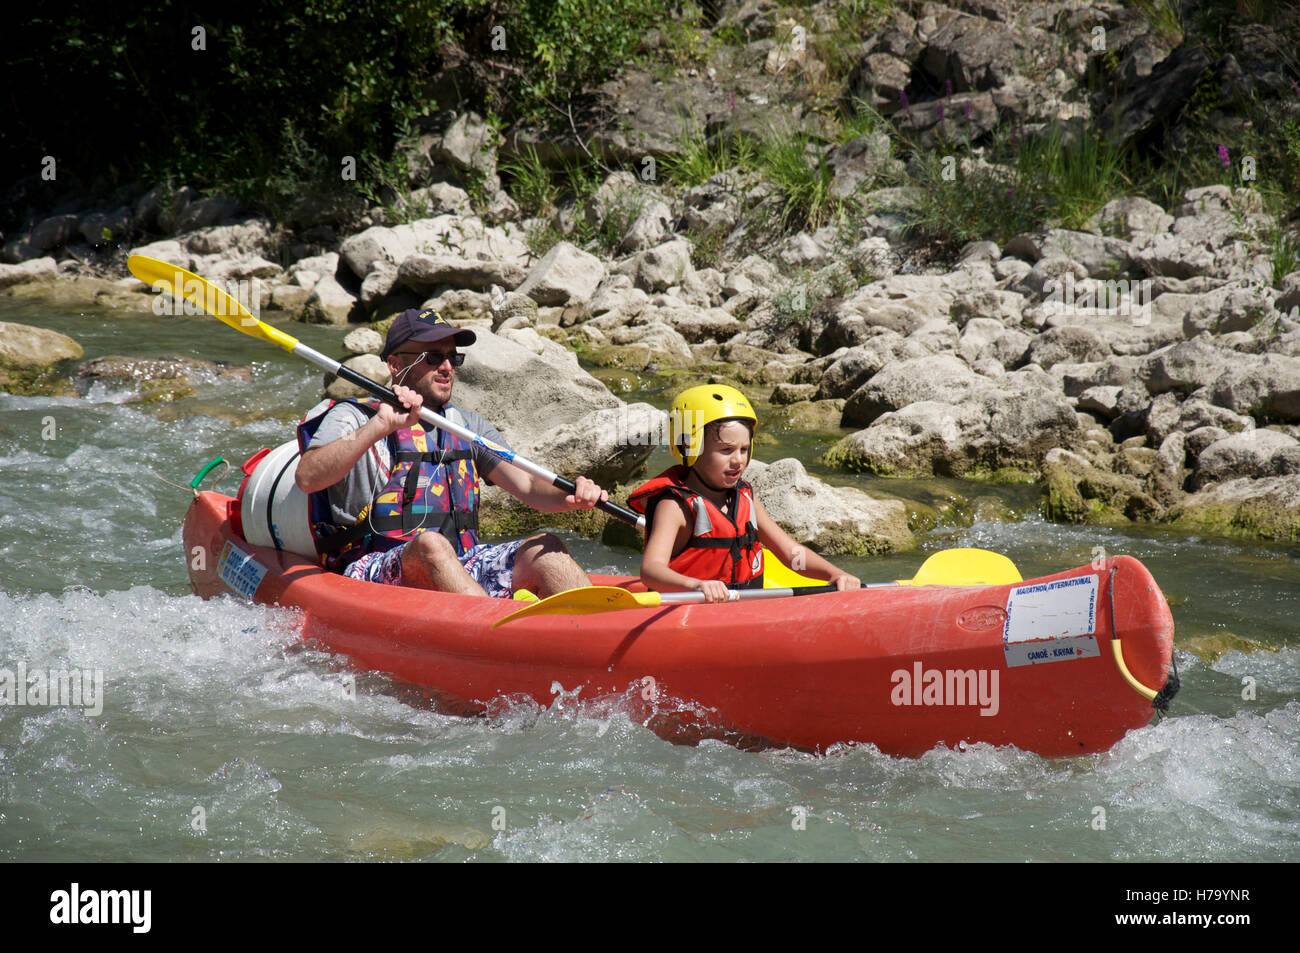 Tourism, water-sports. A father and his young son canoeing down the turbulent fast flowing waters of the Drôme River. Near Saillans, La Drôme, France. Stock Photo